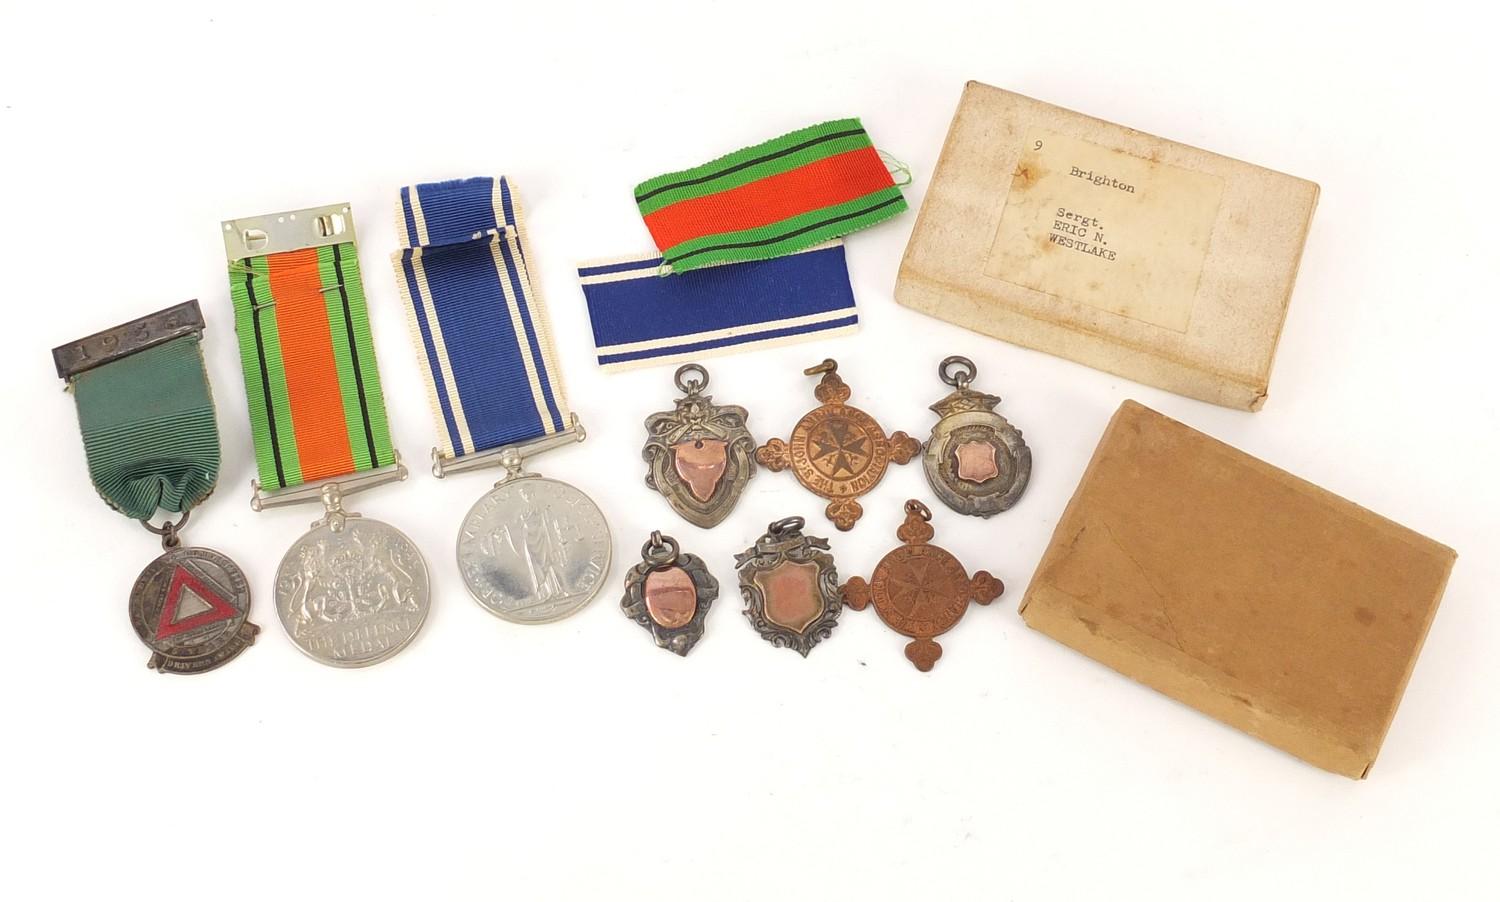 British military World War II Police, military and St John Ambulance medals and jewels, including